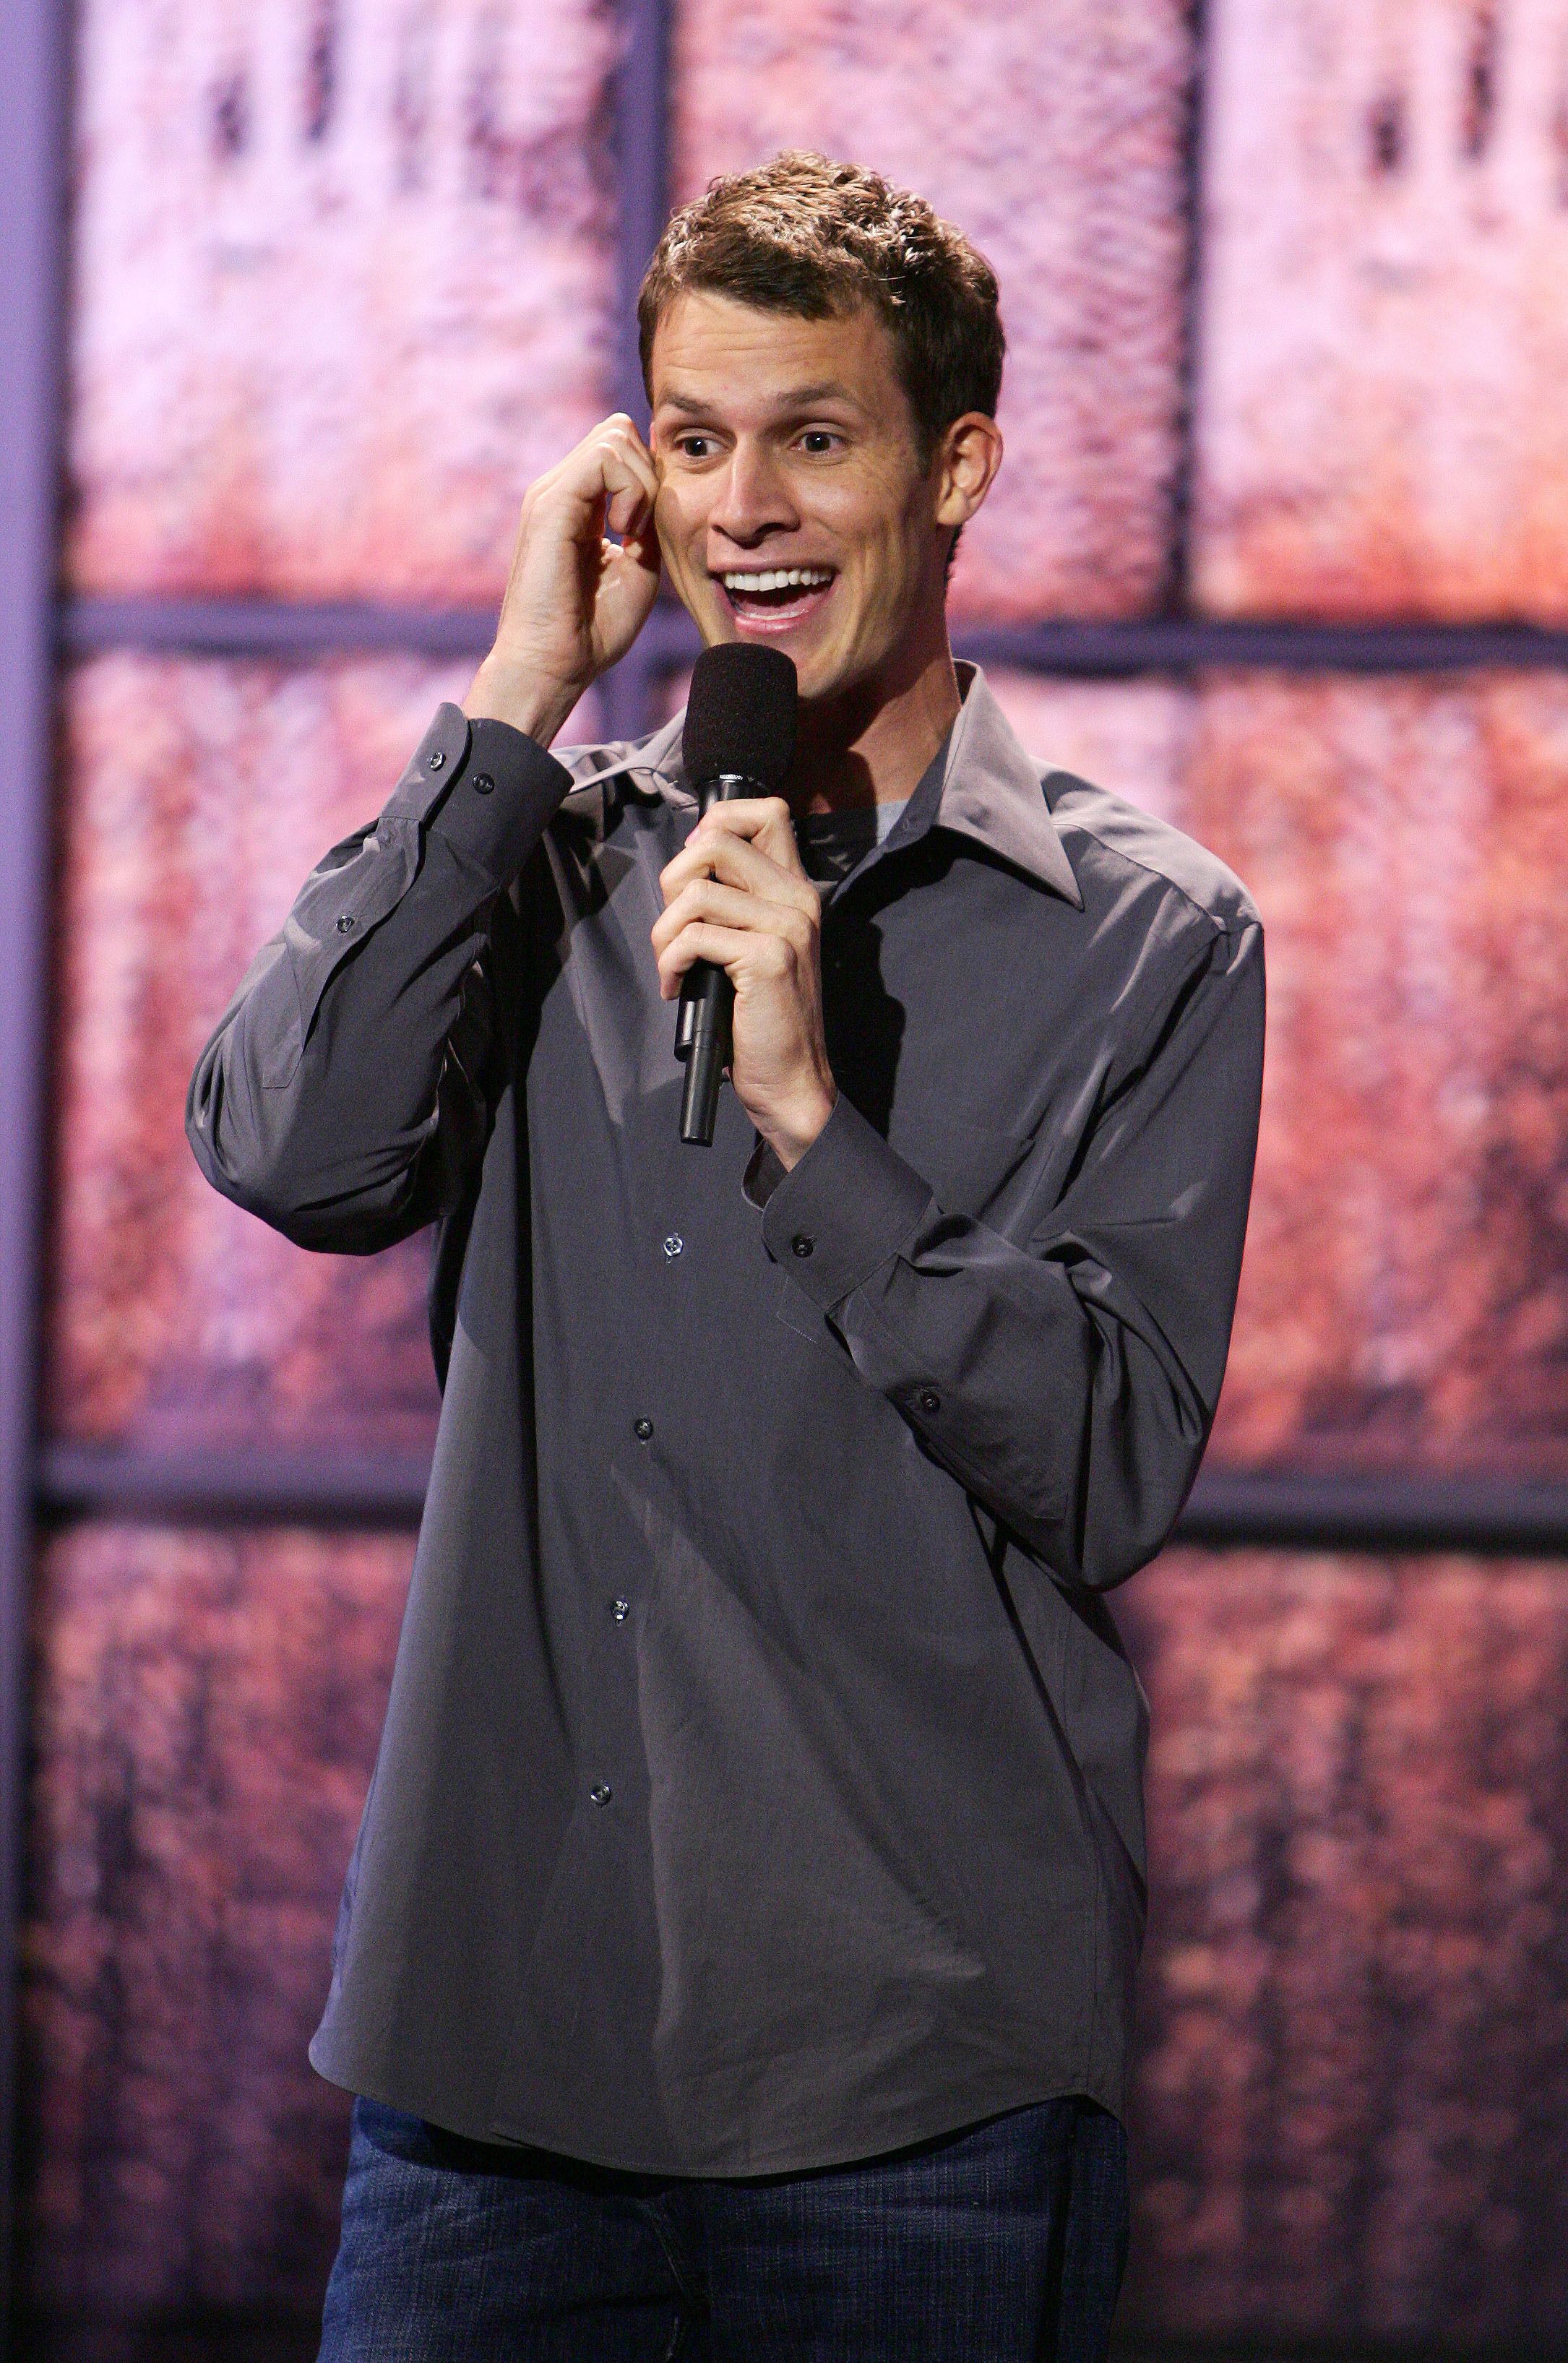 Daniel Tosh on Last Call with Carson Daly